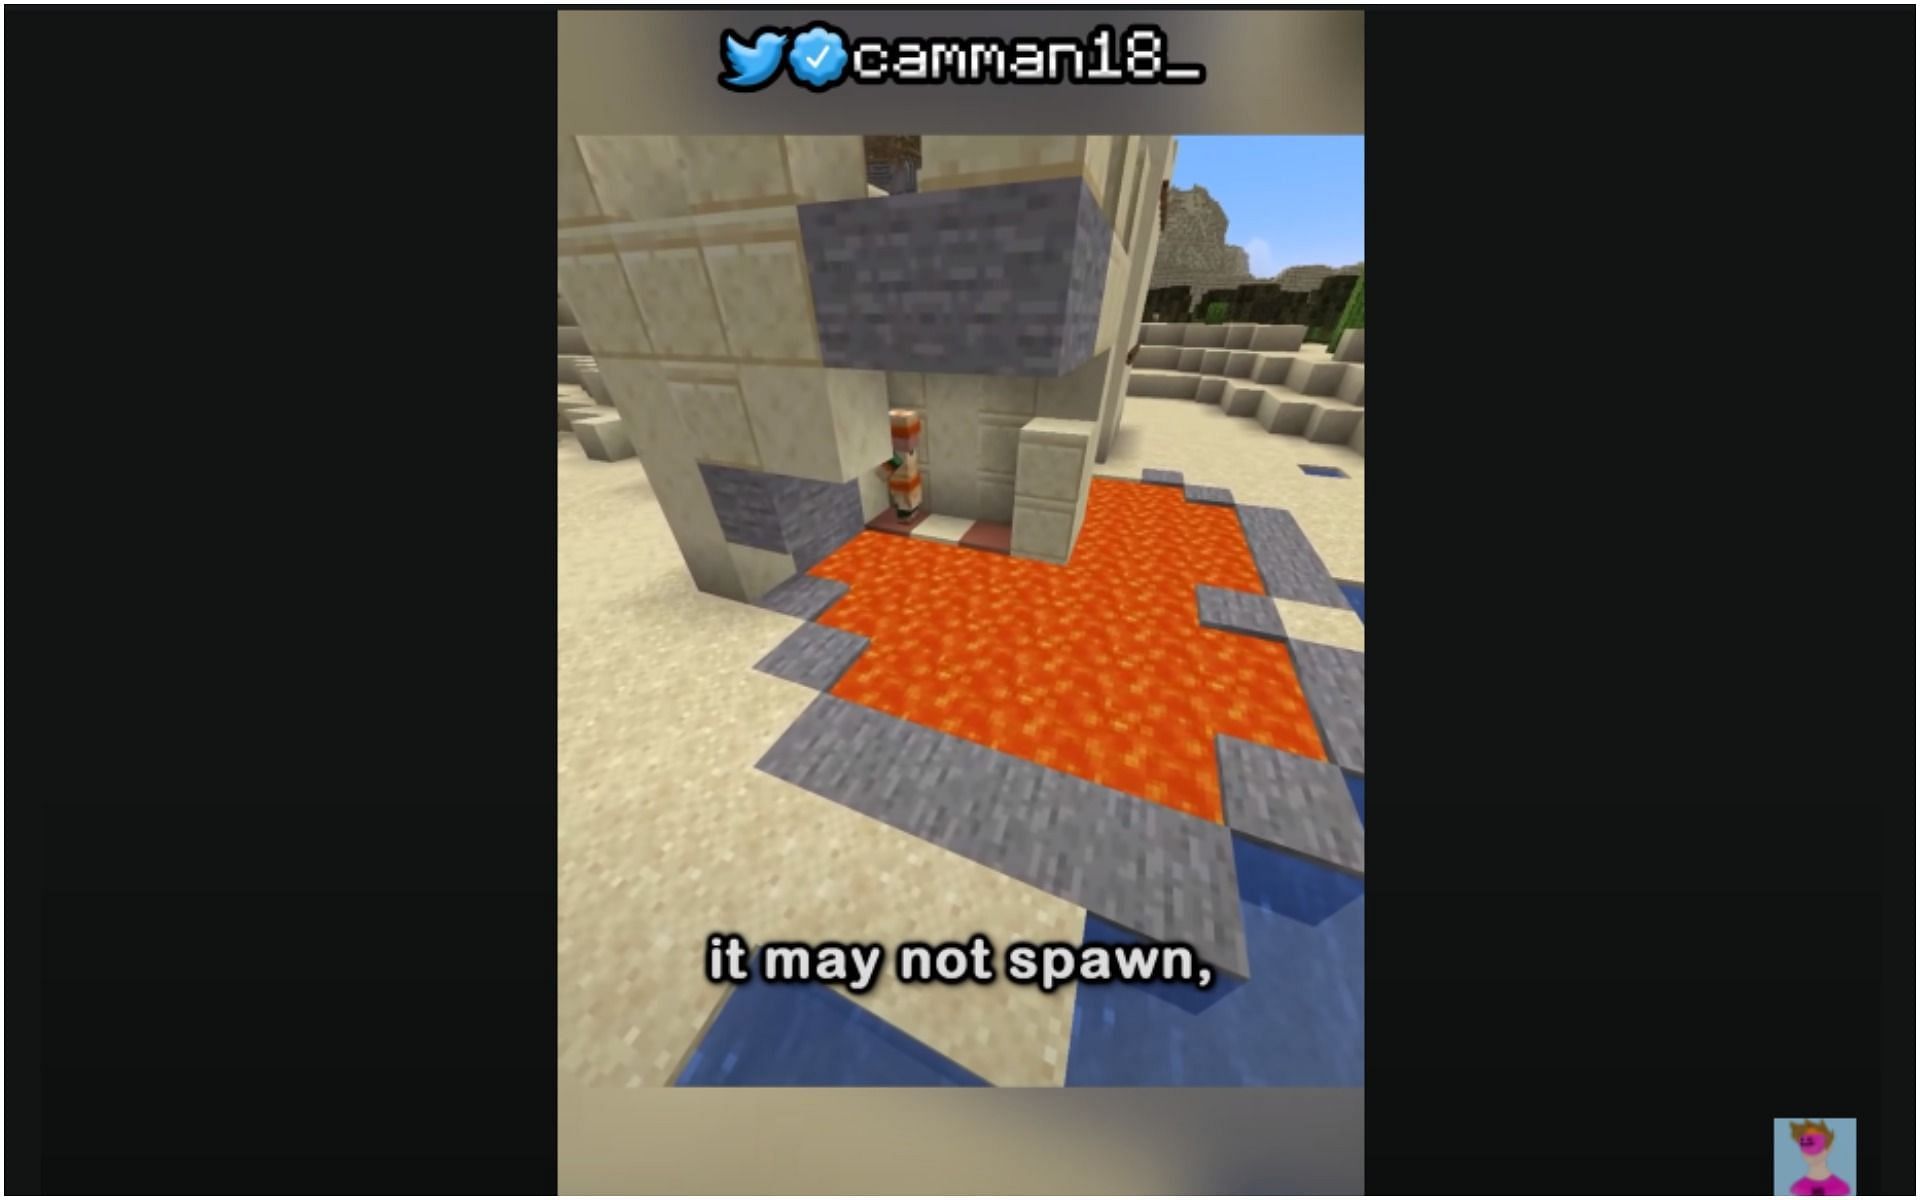 The bed is absent in a different rendition of the seed (Image via YouTube/camman18)